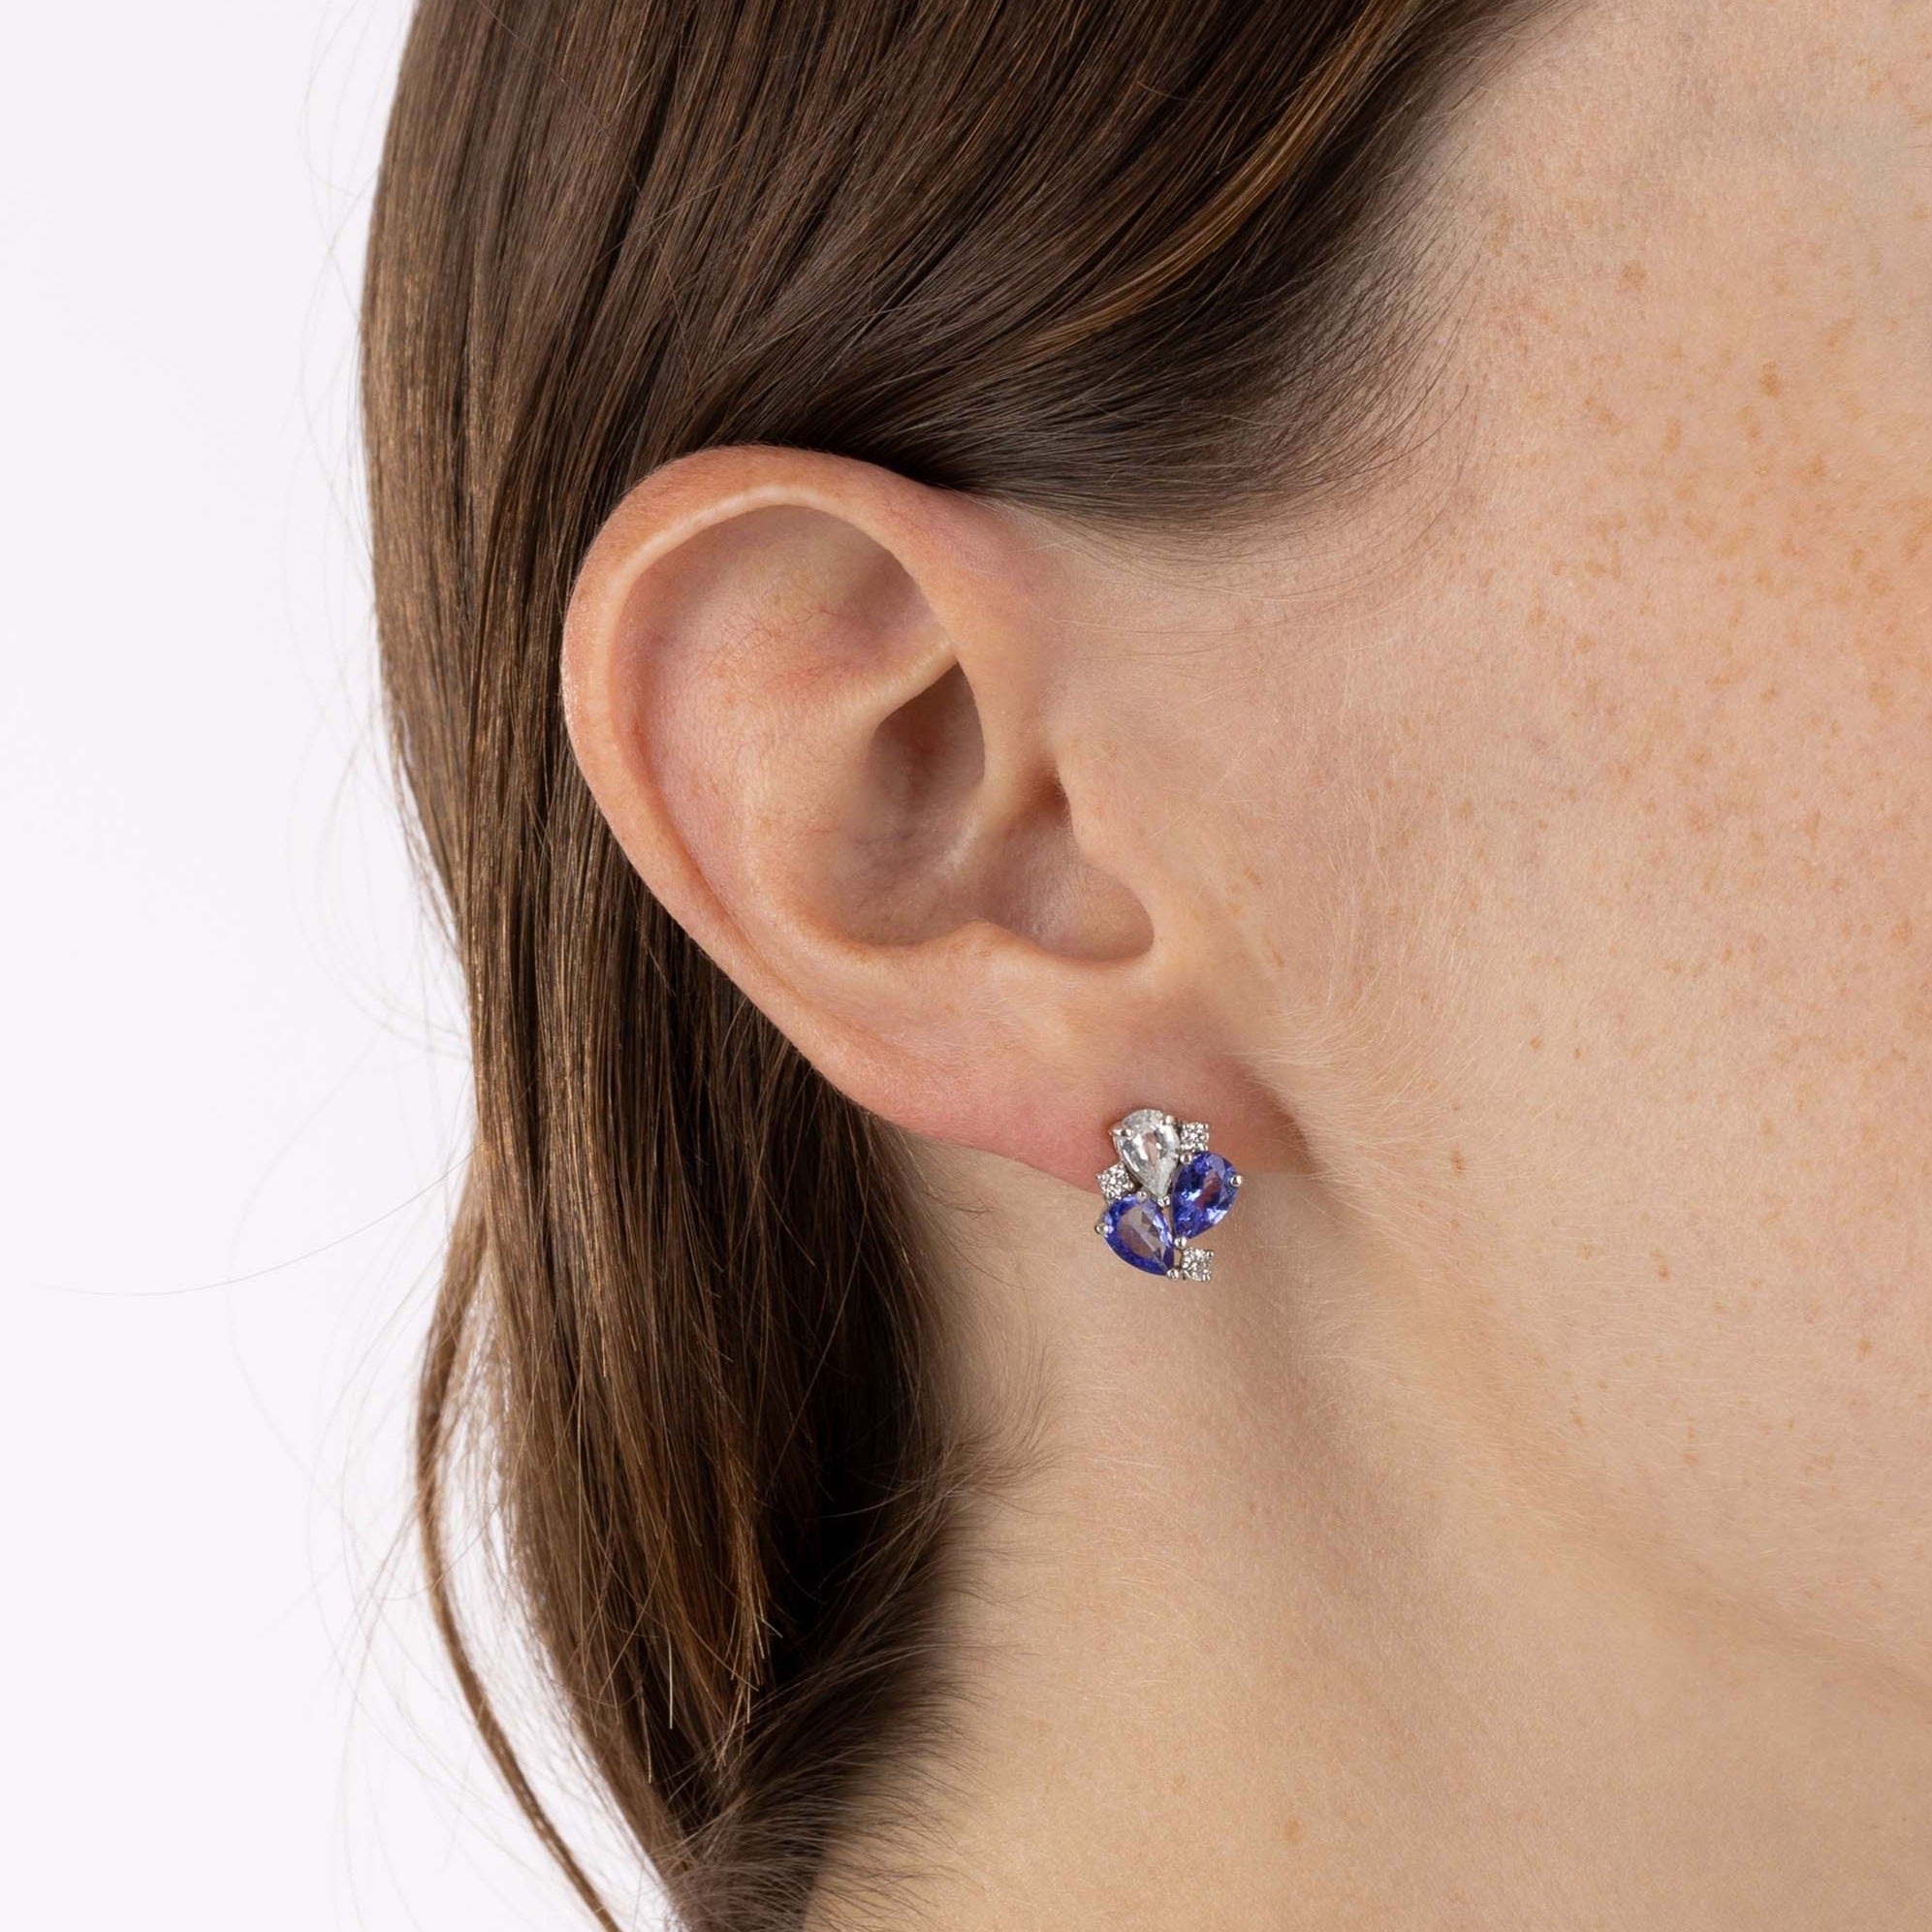 White Gold Earrings with pear shaped Tanzanite and Morganite, and small round Diamonds, Small - Model shot